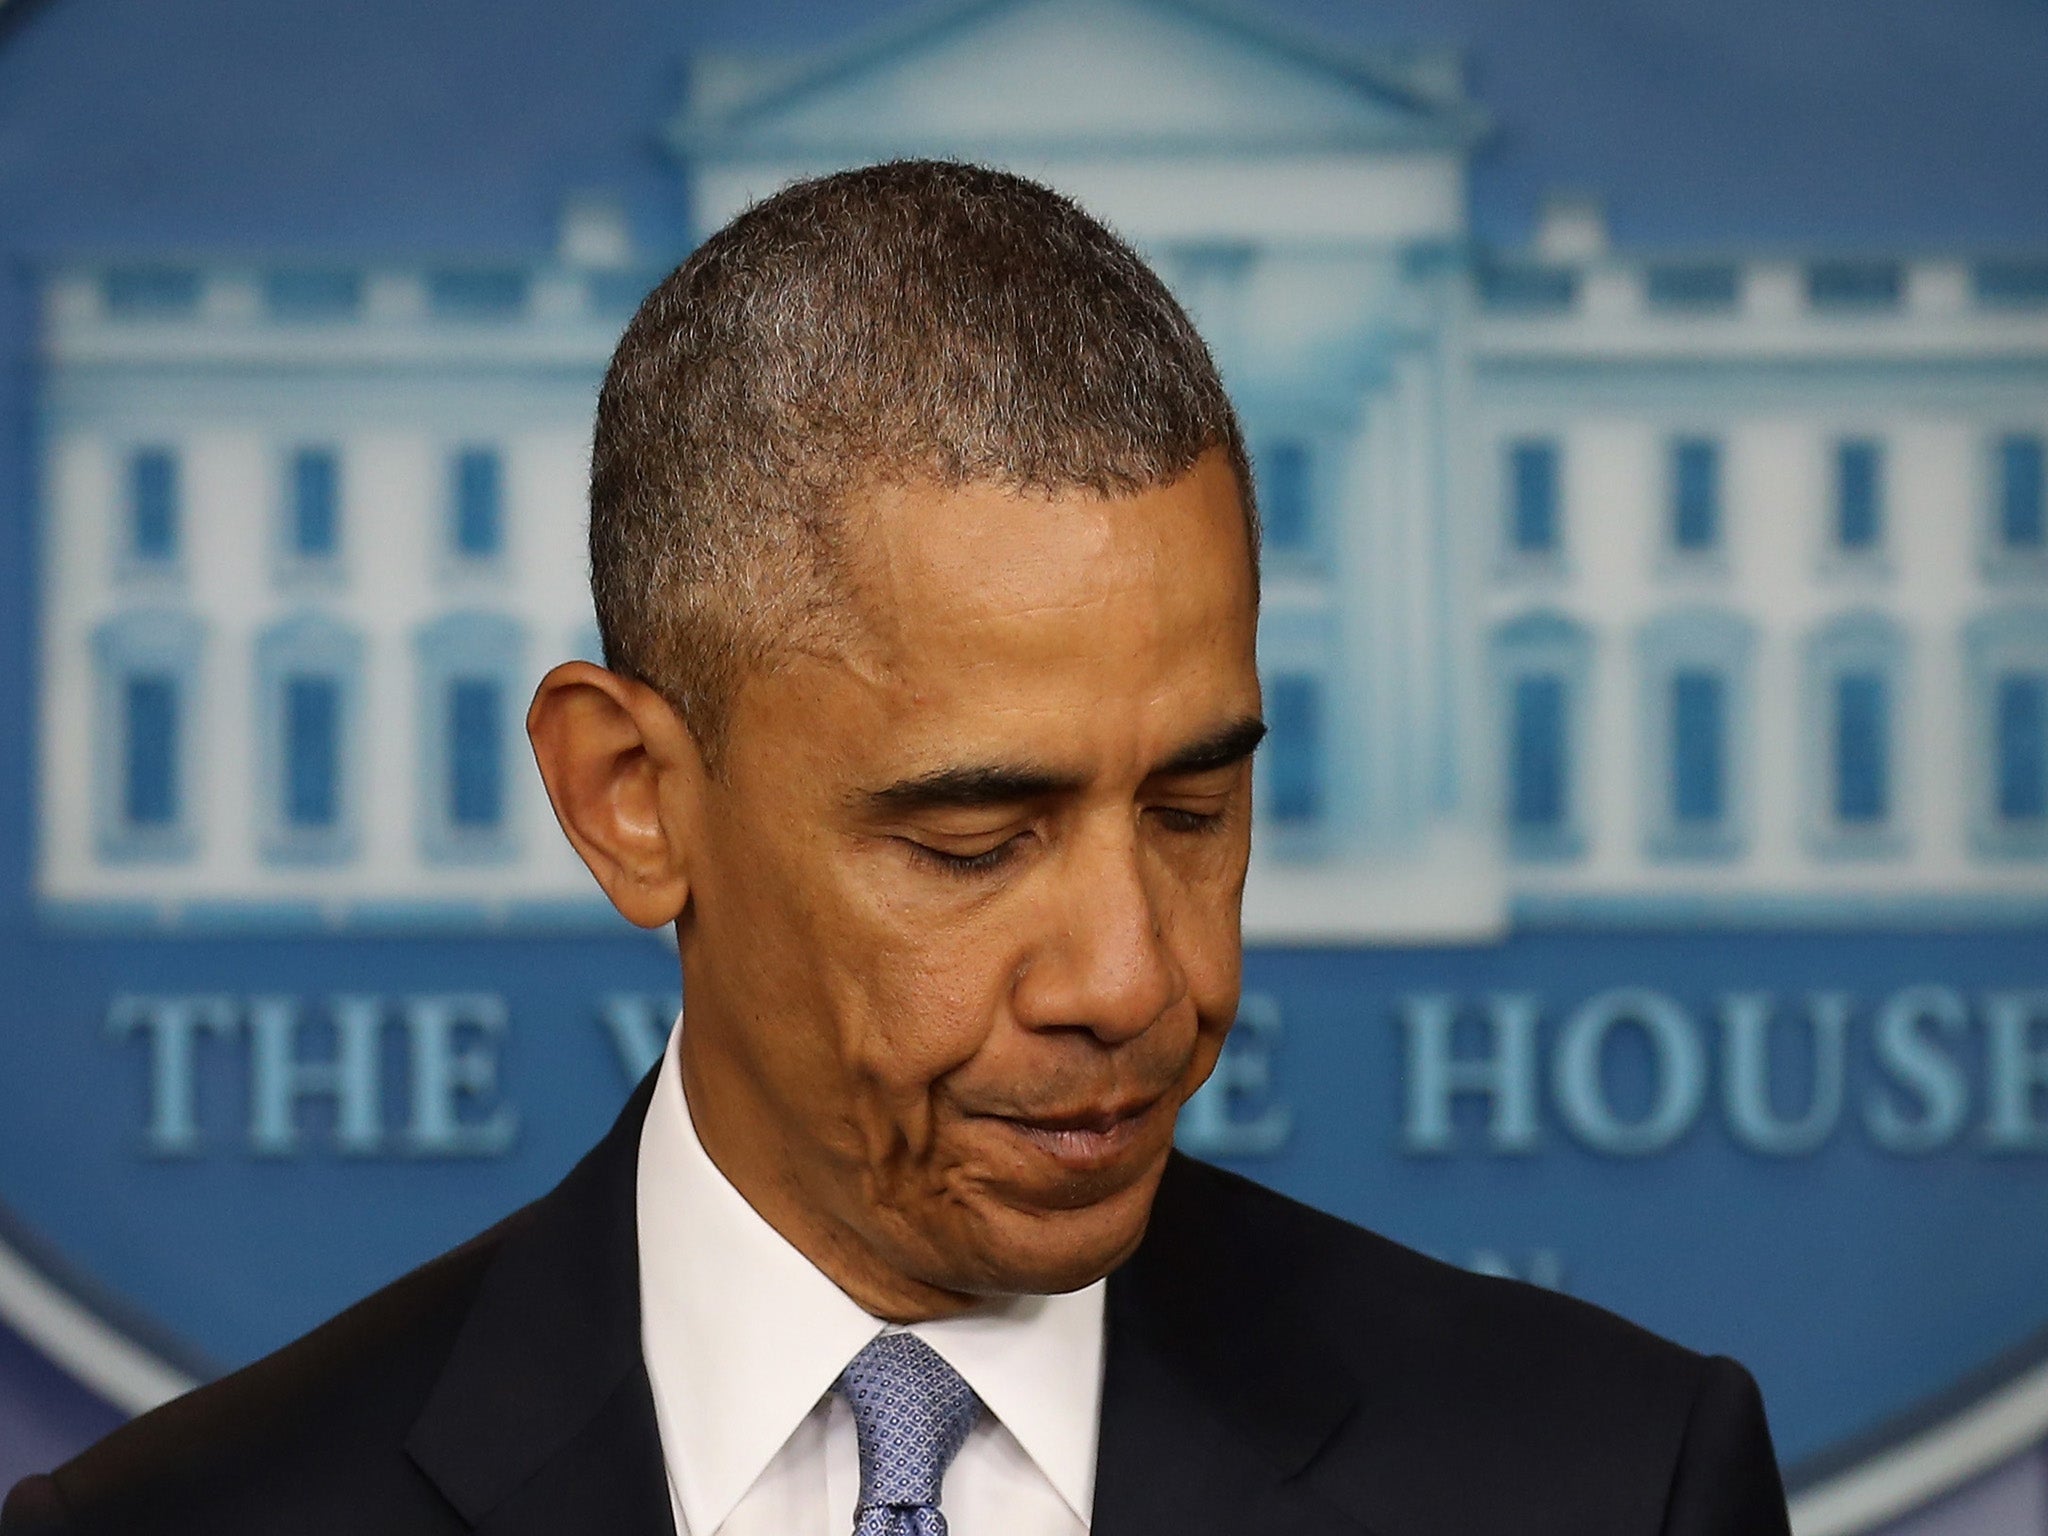 Barack Obama offered his profound regrets over the deaths of the two men